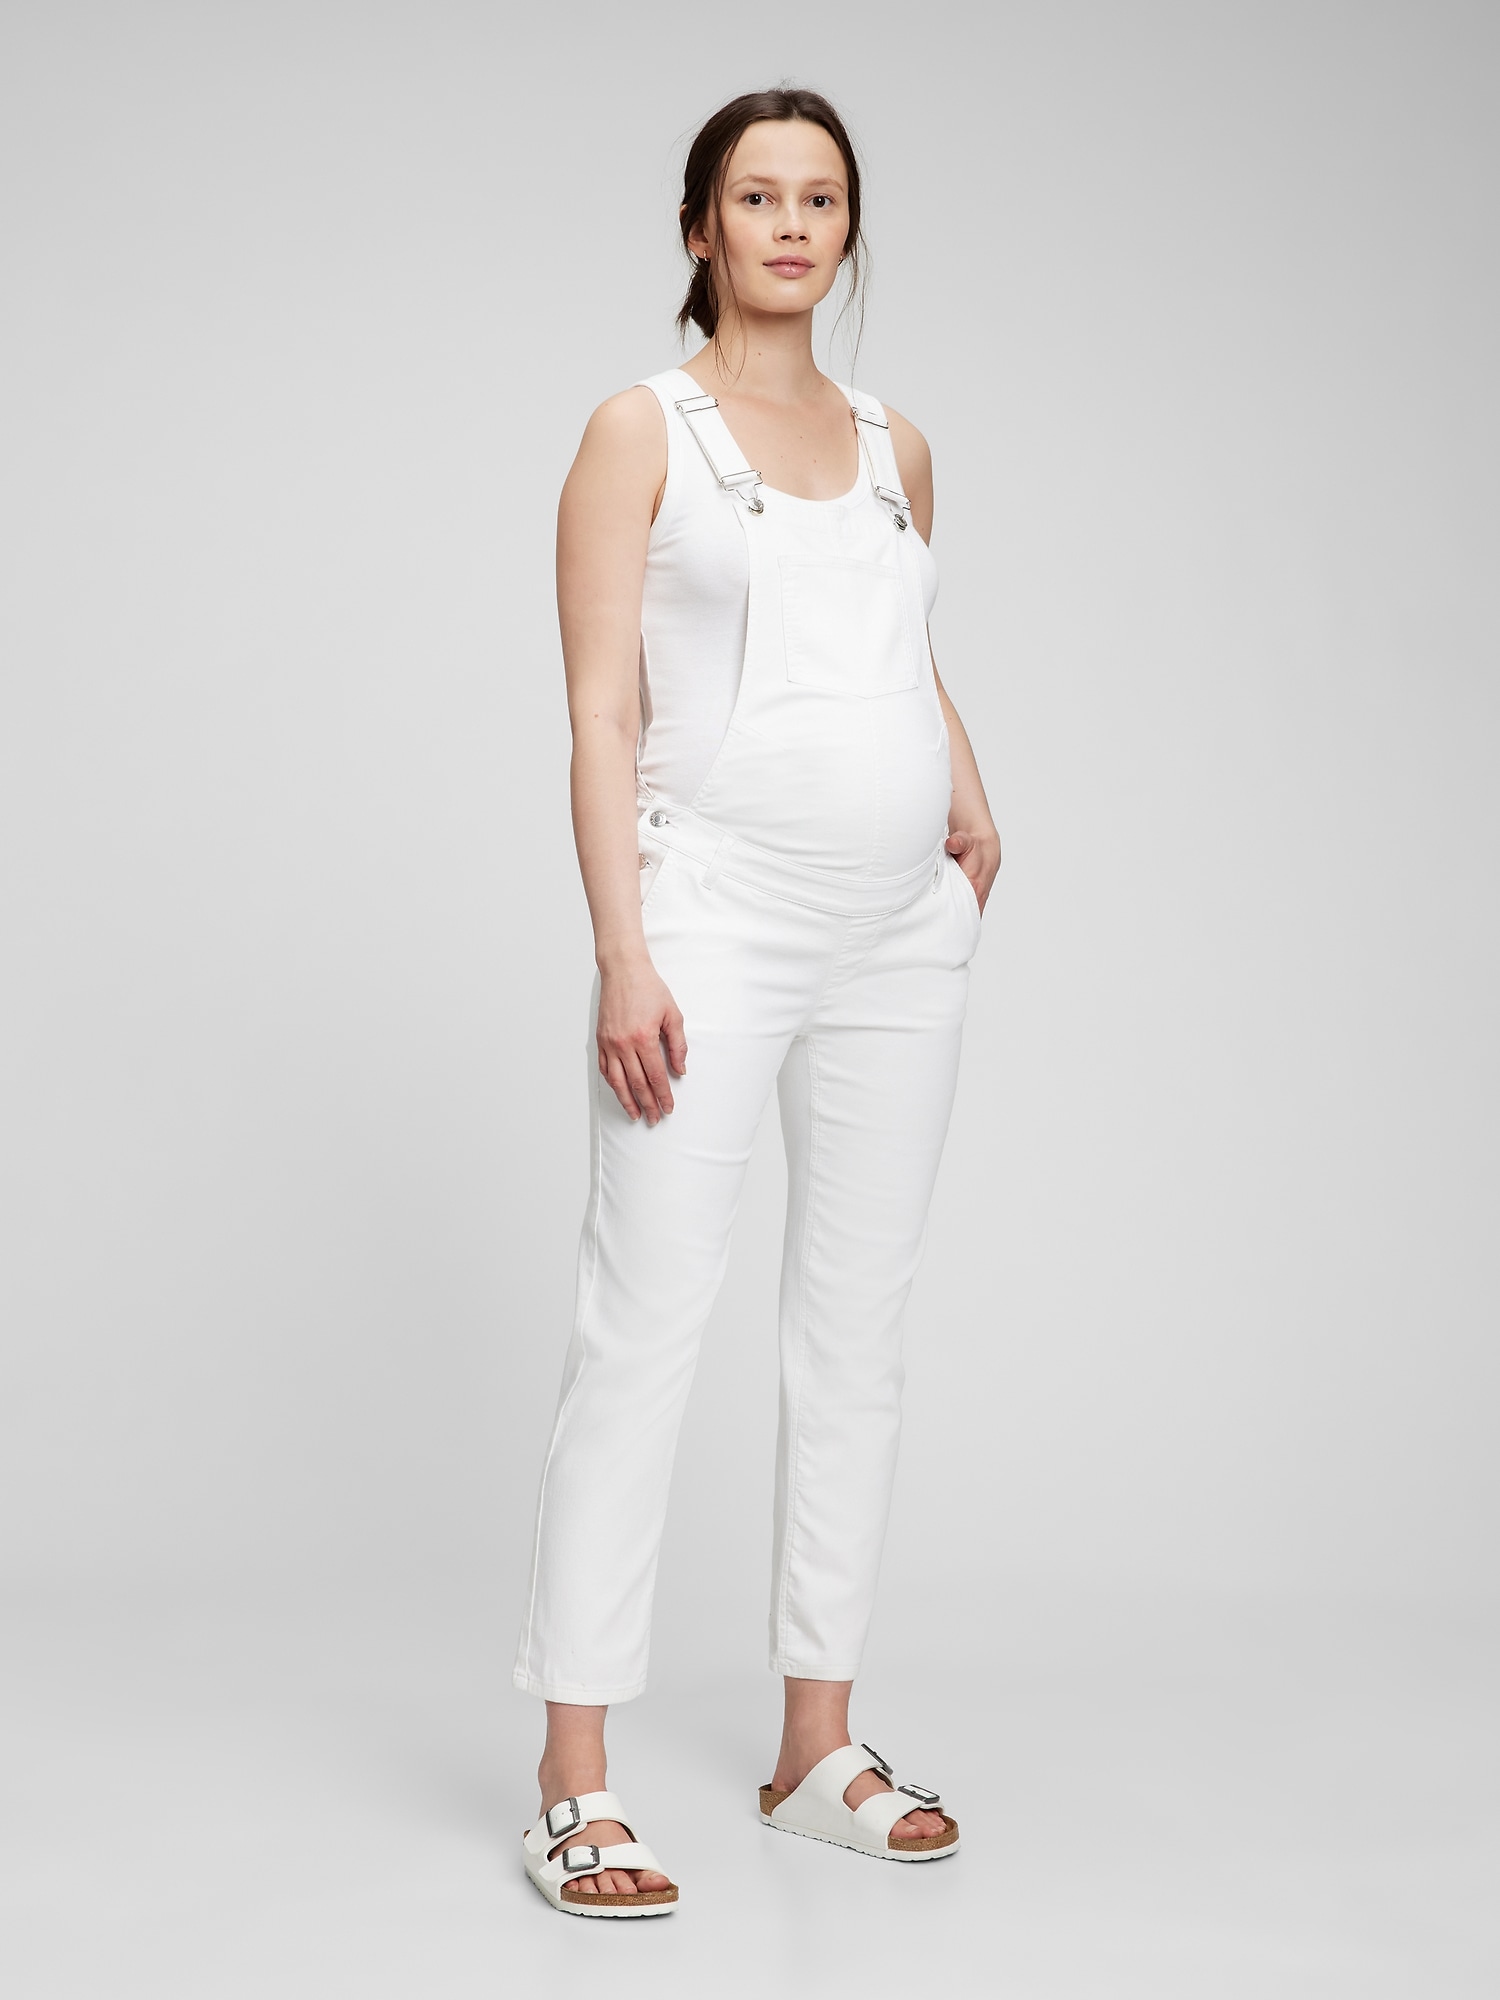 Gap Maternity Denim Overalls with Washwell